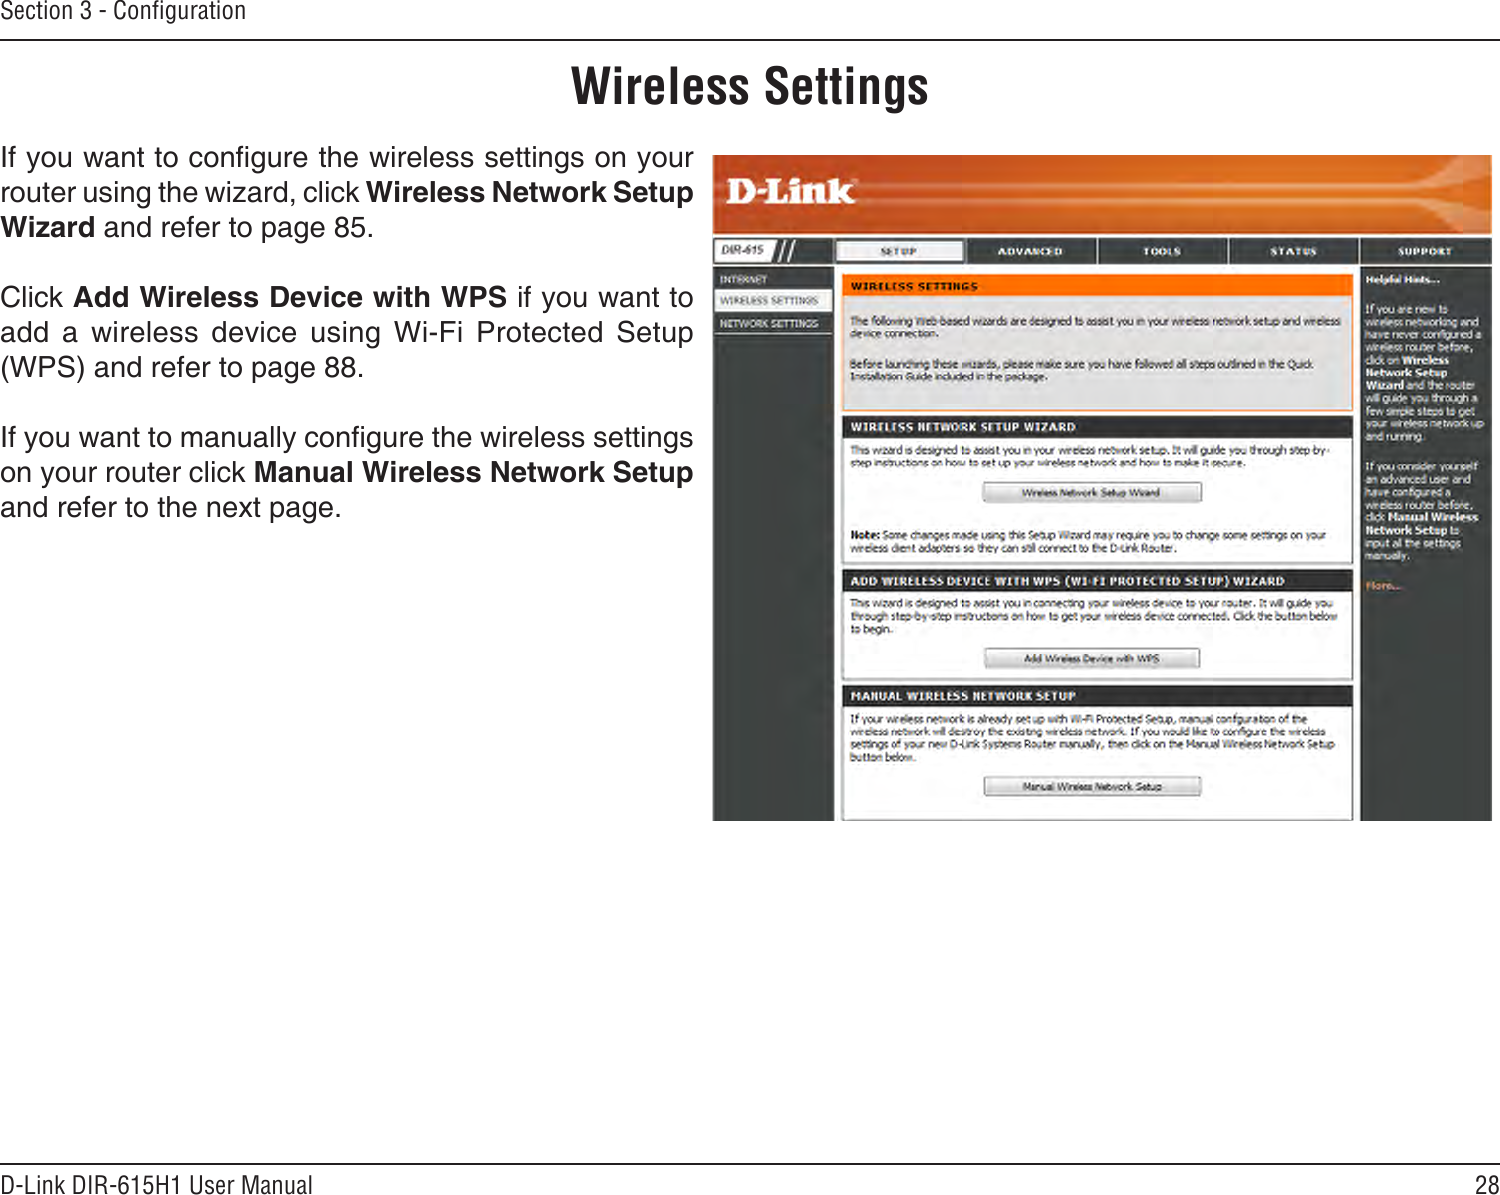 28D-Link DIR-615H1 User ManualSection 3 - CongurationWireless SettingsIf you want to congure the wireless settings on your router using the wizard, click Wireless Network Setup Wizard and refer to page 85.Click Add Wireless Device with WPS if you want to add  a  wireless  device  using  Wi-Fi  Protected  Setup (WPS) and refer to page 88.If you want to manually congure the wireless settings on your router click Manual Wireless Network Setup and refer to the next page.